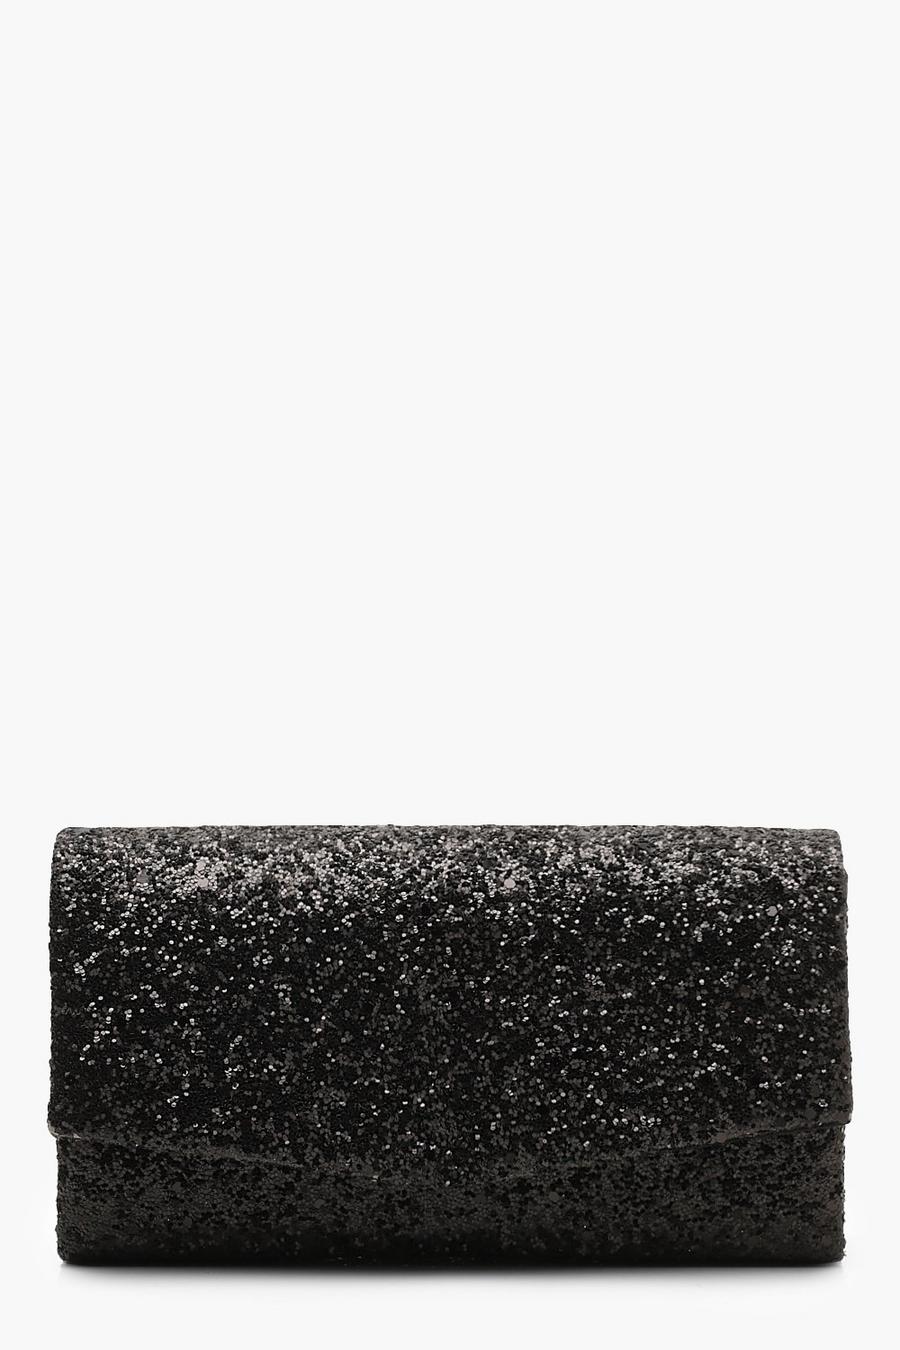 Black Structured Glitter Envelope Clutch Bag With Chain